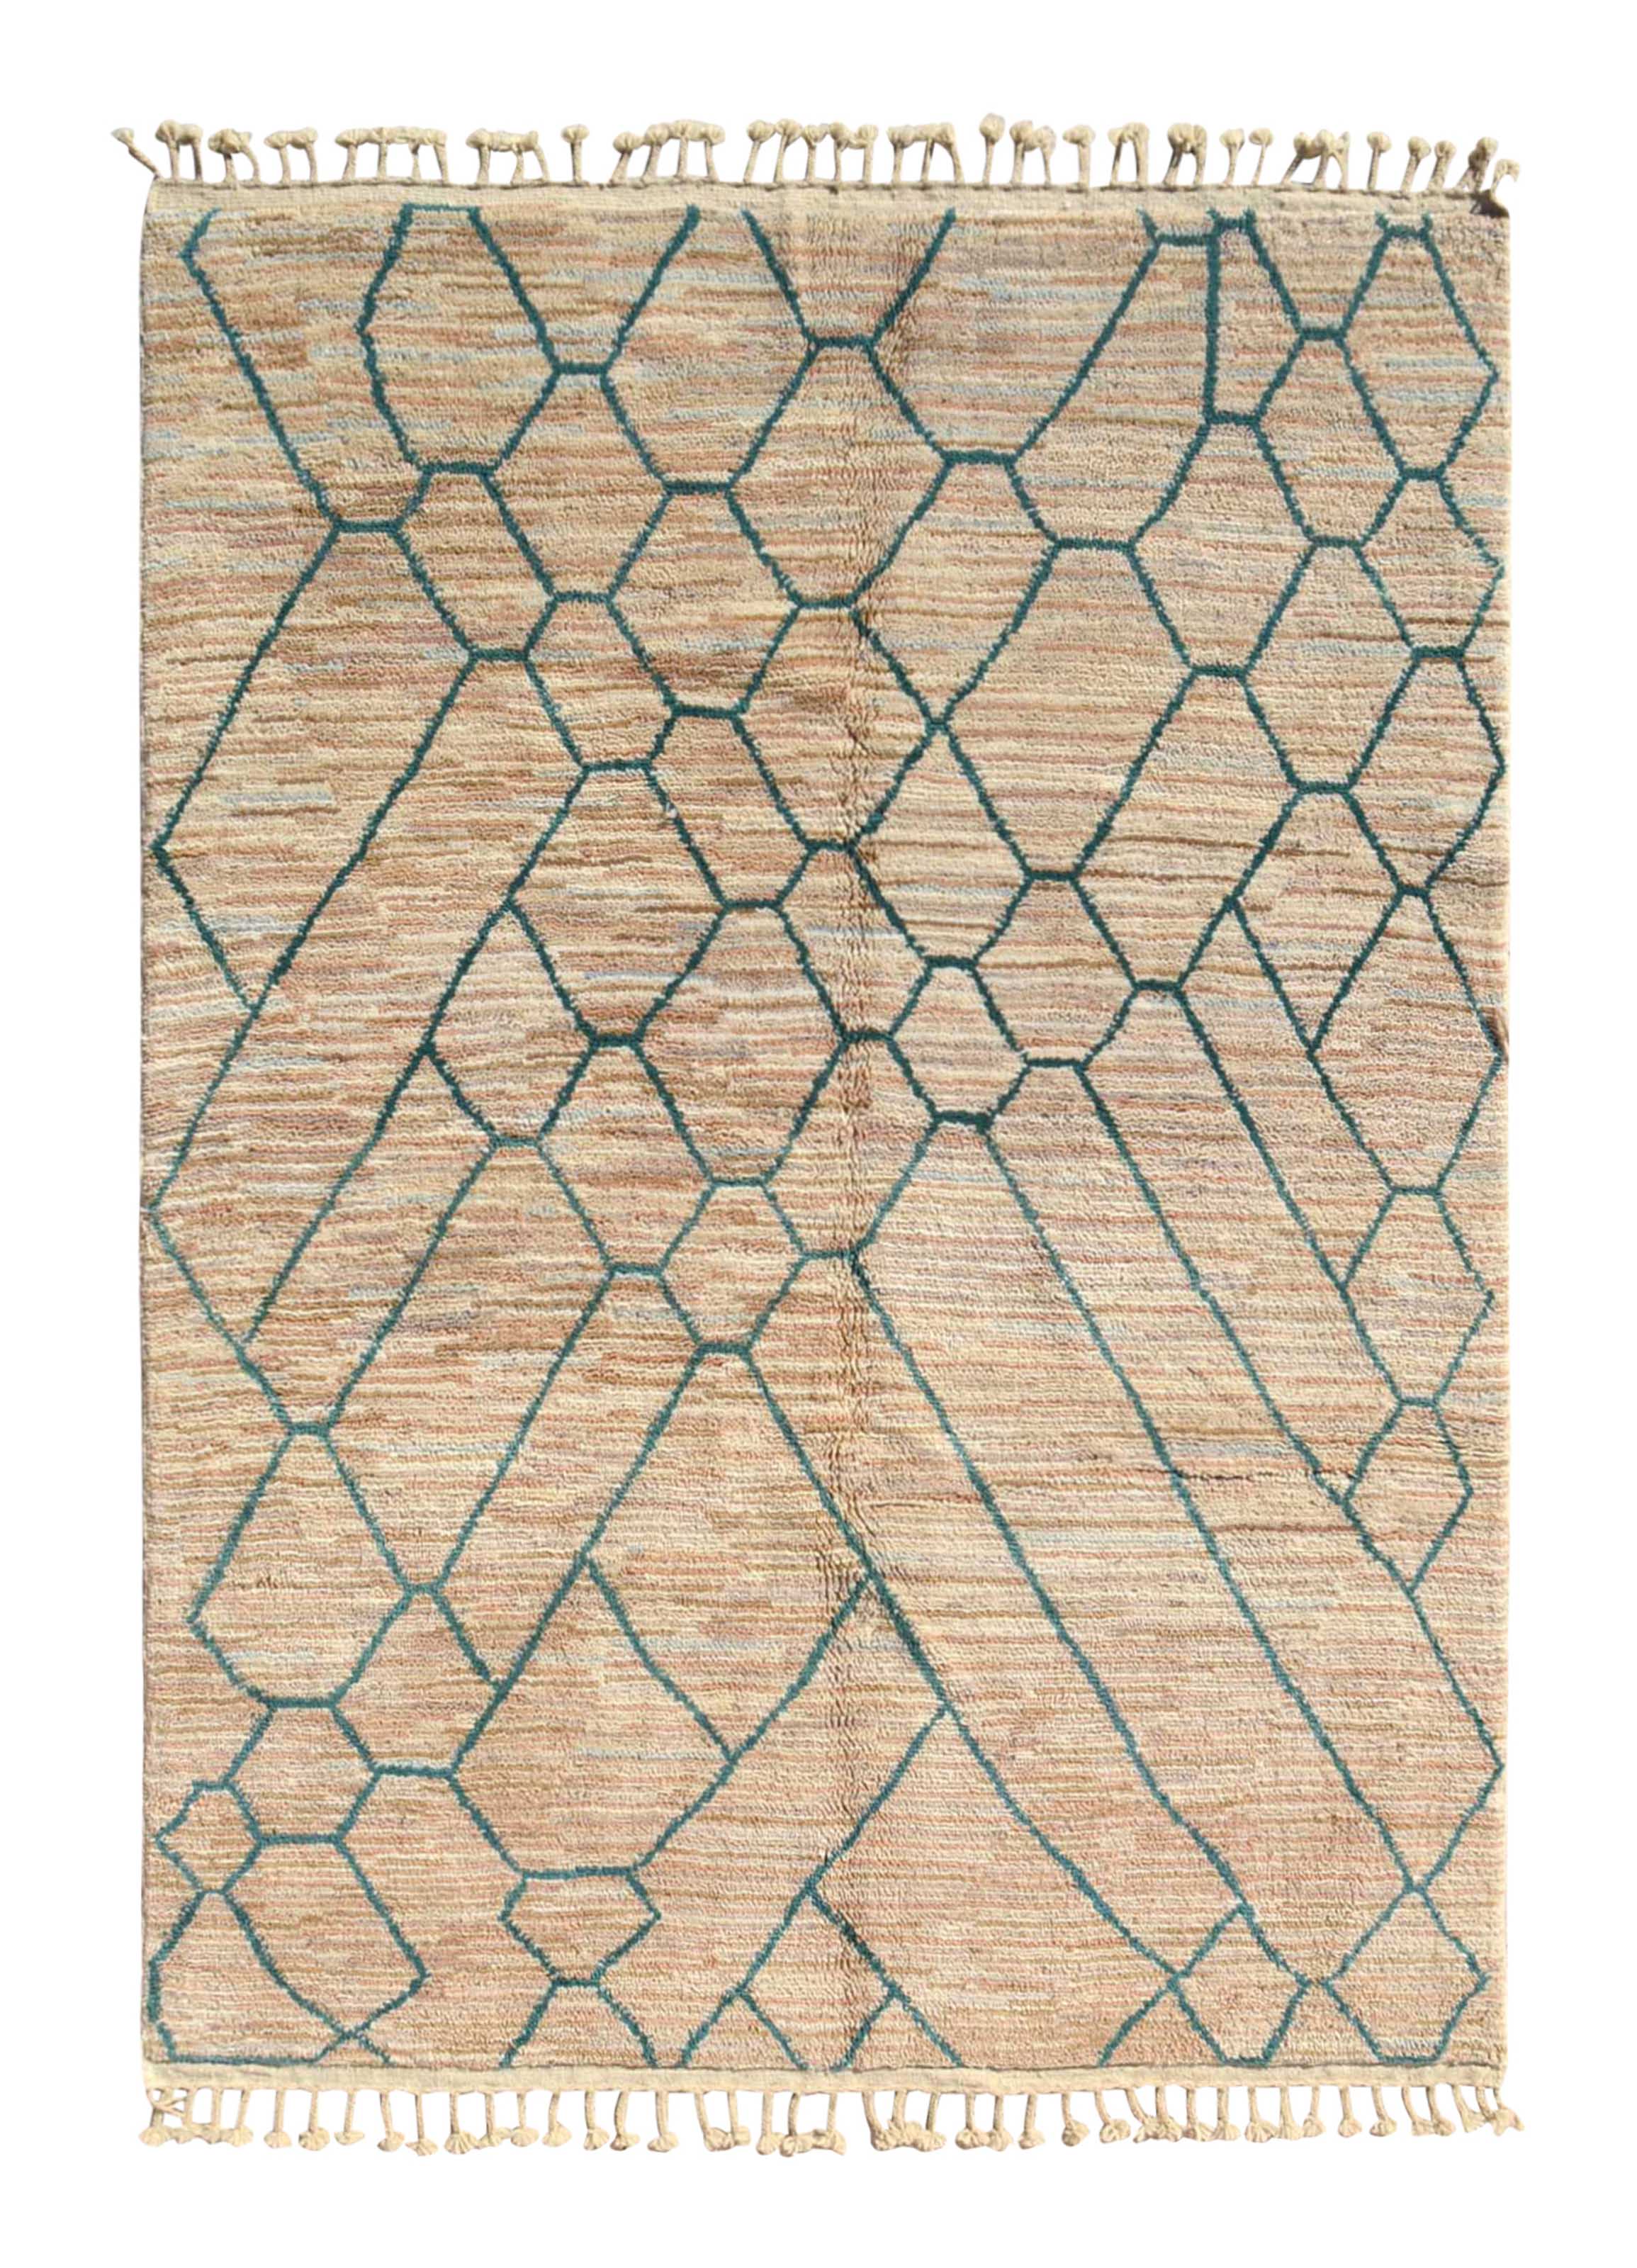 Discover Tranquility with our Moroccan Lagoon Handmade Rug Collection